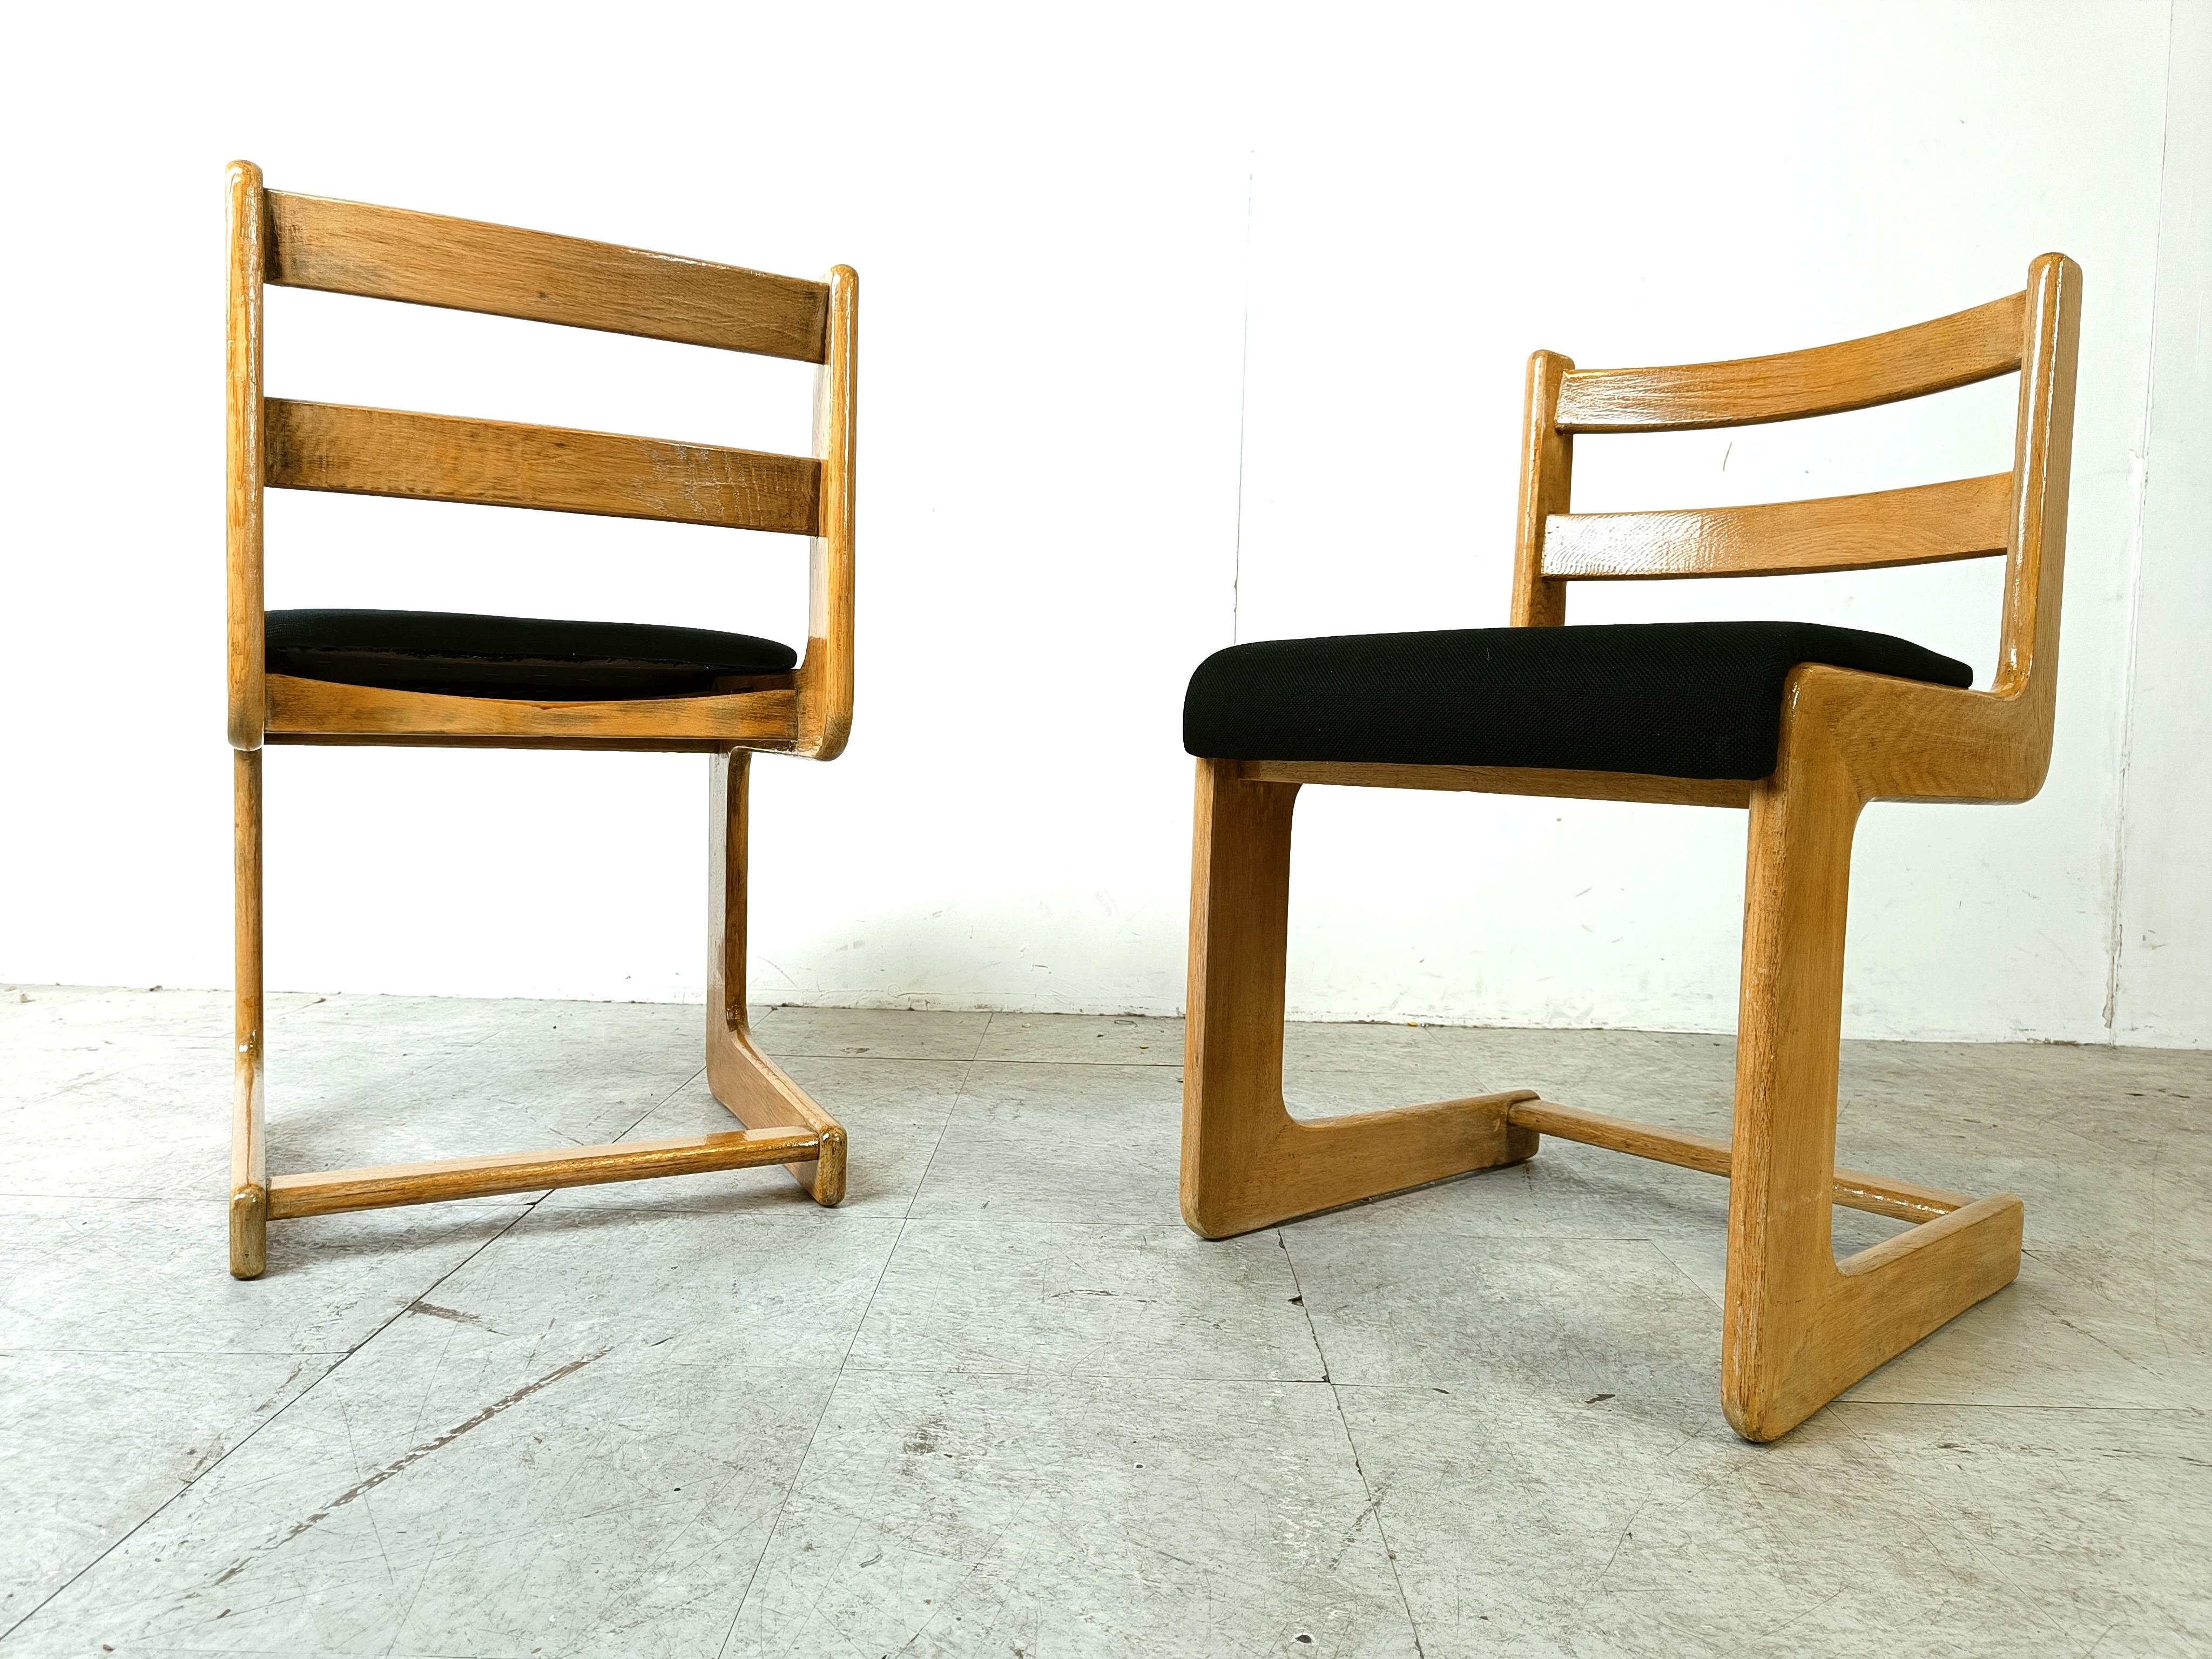 Vintage cantilever chairs by Casala, 1970s For Sale 1